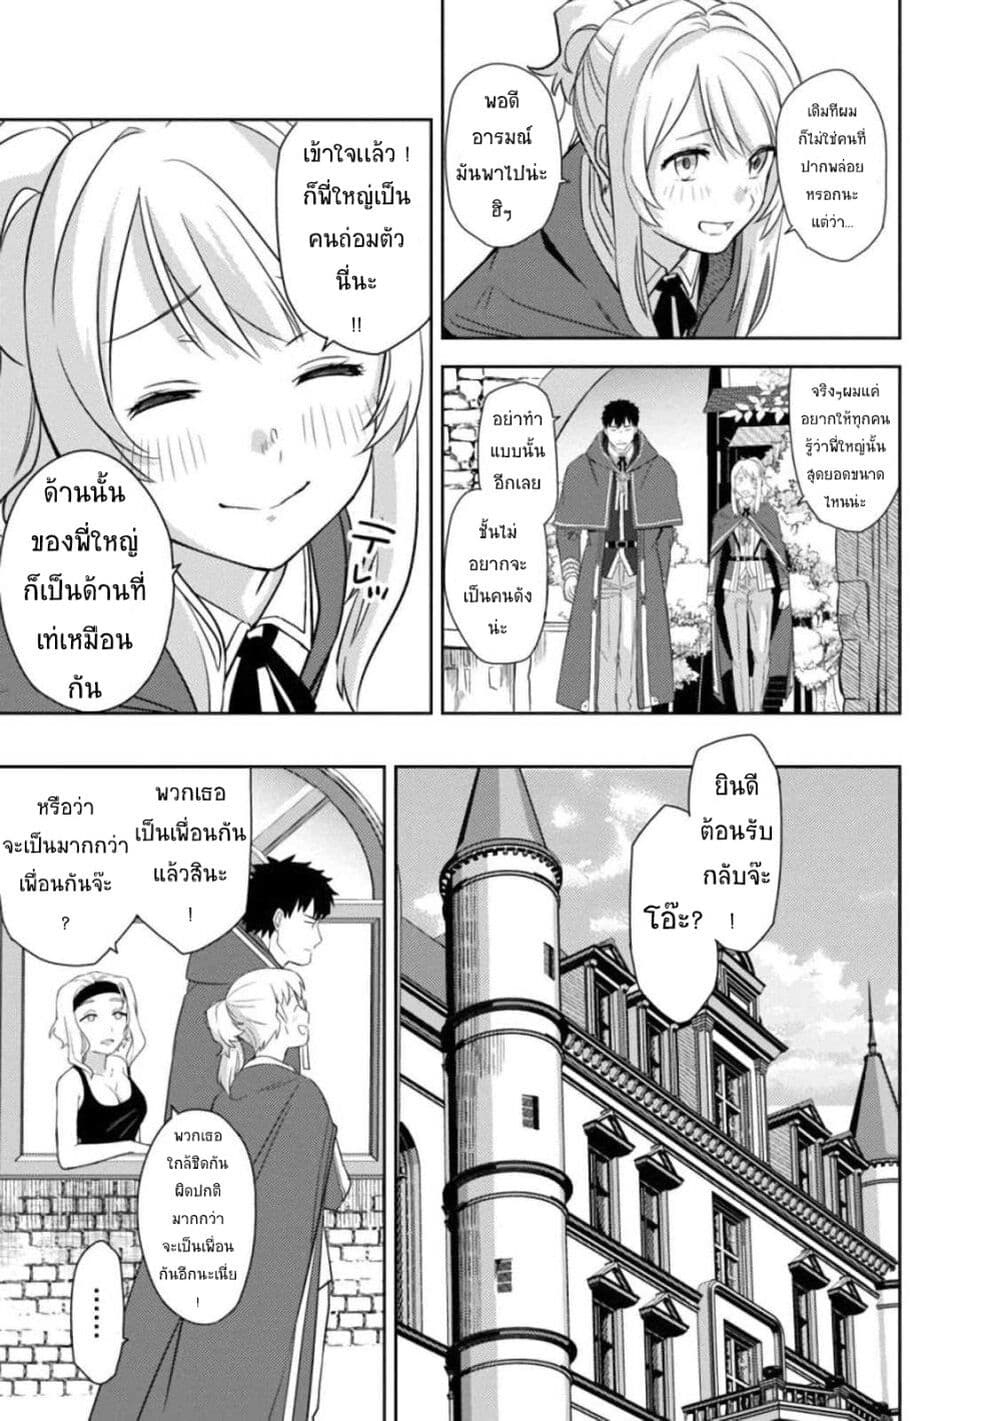 The Reincarnated Swordsman With 9999 Strength Wants to Become a Magician! ตอนที่ 2.2 (1)